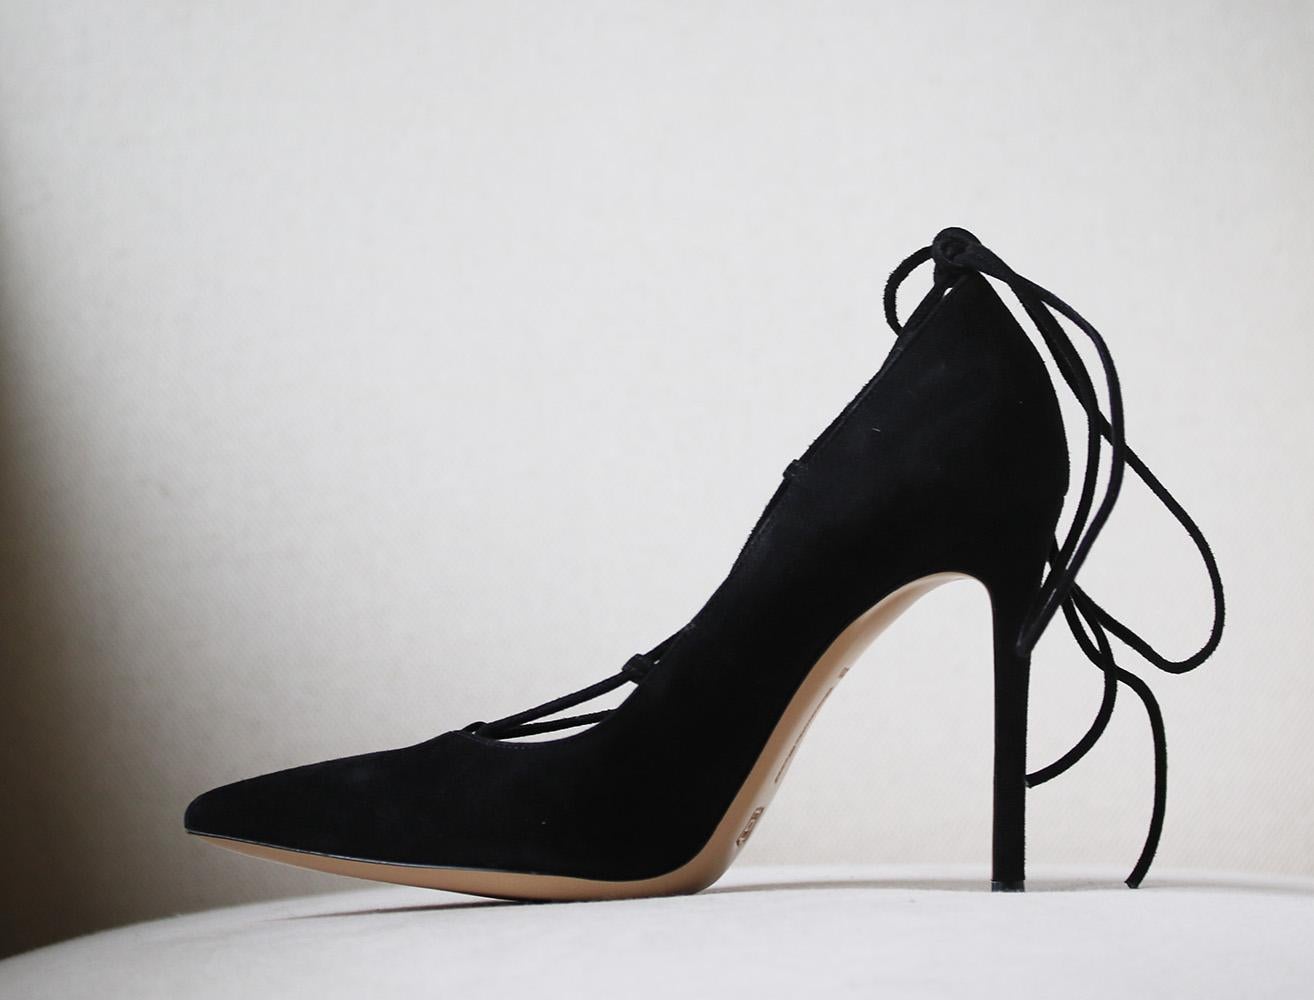 The epitome of modern elegance, these Femì pumps from Gianvito Rossi provide a stylish finishing touch to both day and evening attire. Accented with a pointed toe, lace-up front and stiletto heel, this expertly crafted black suede pair is as